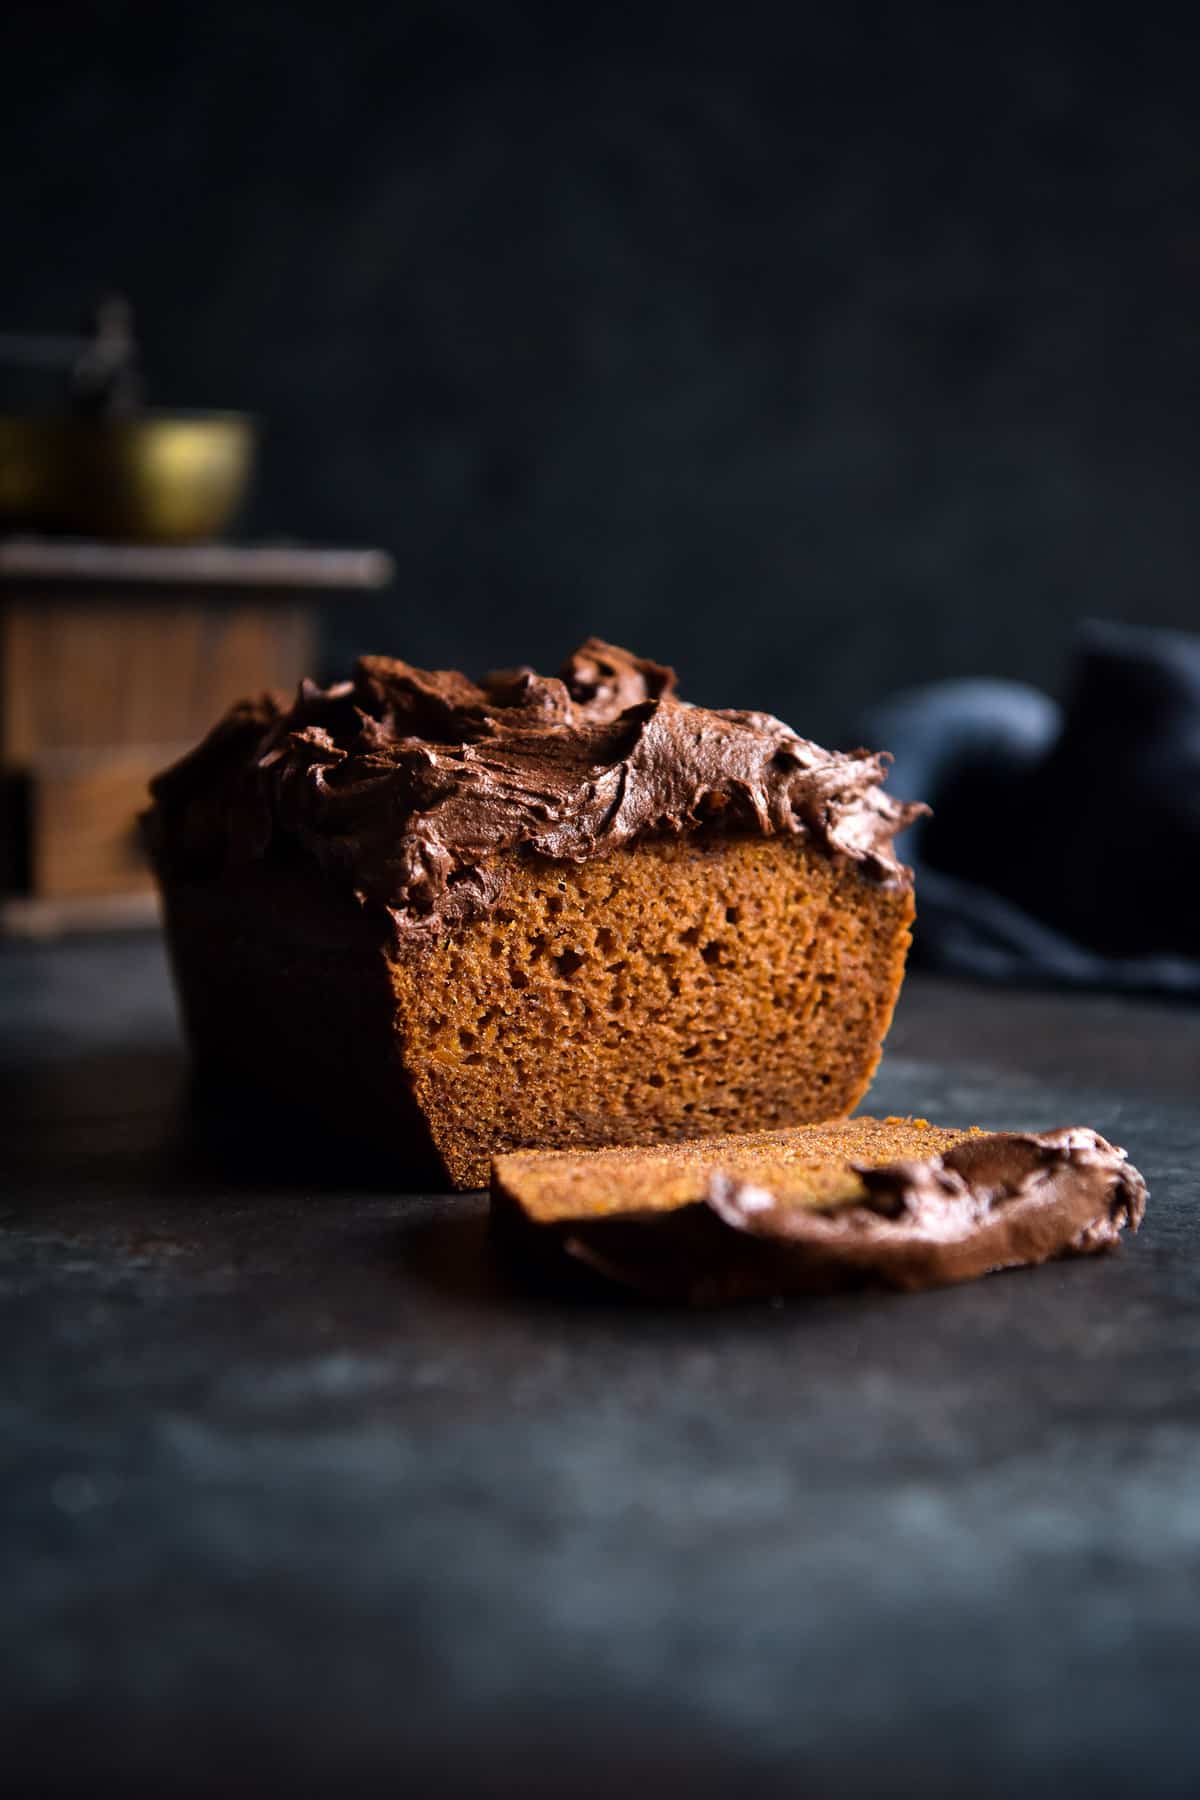 A side on view of a gluten free pumpkin loaf topped with chocolate chai icing. The loaf has been sliced to reveal the bright orange crumb. It sits on a dark blue table against a dark blue backdrop.